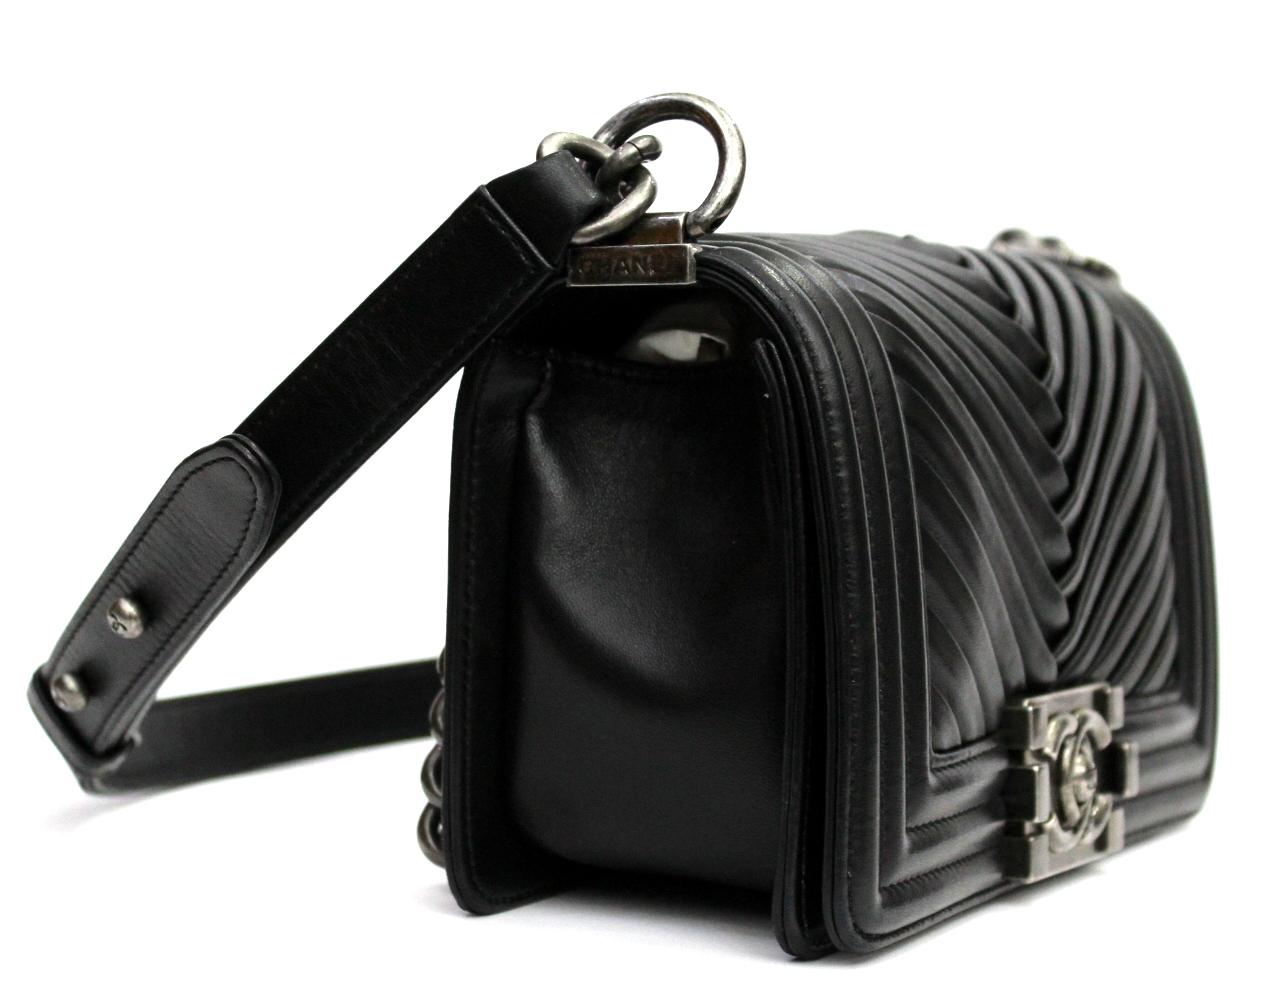 Beautiful Chanel Boy bag made of lambskin with chevron pattern. Black color with hardware silver. This is the smallest measure about 